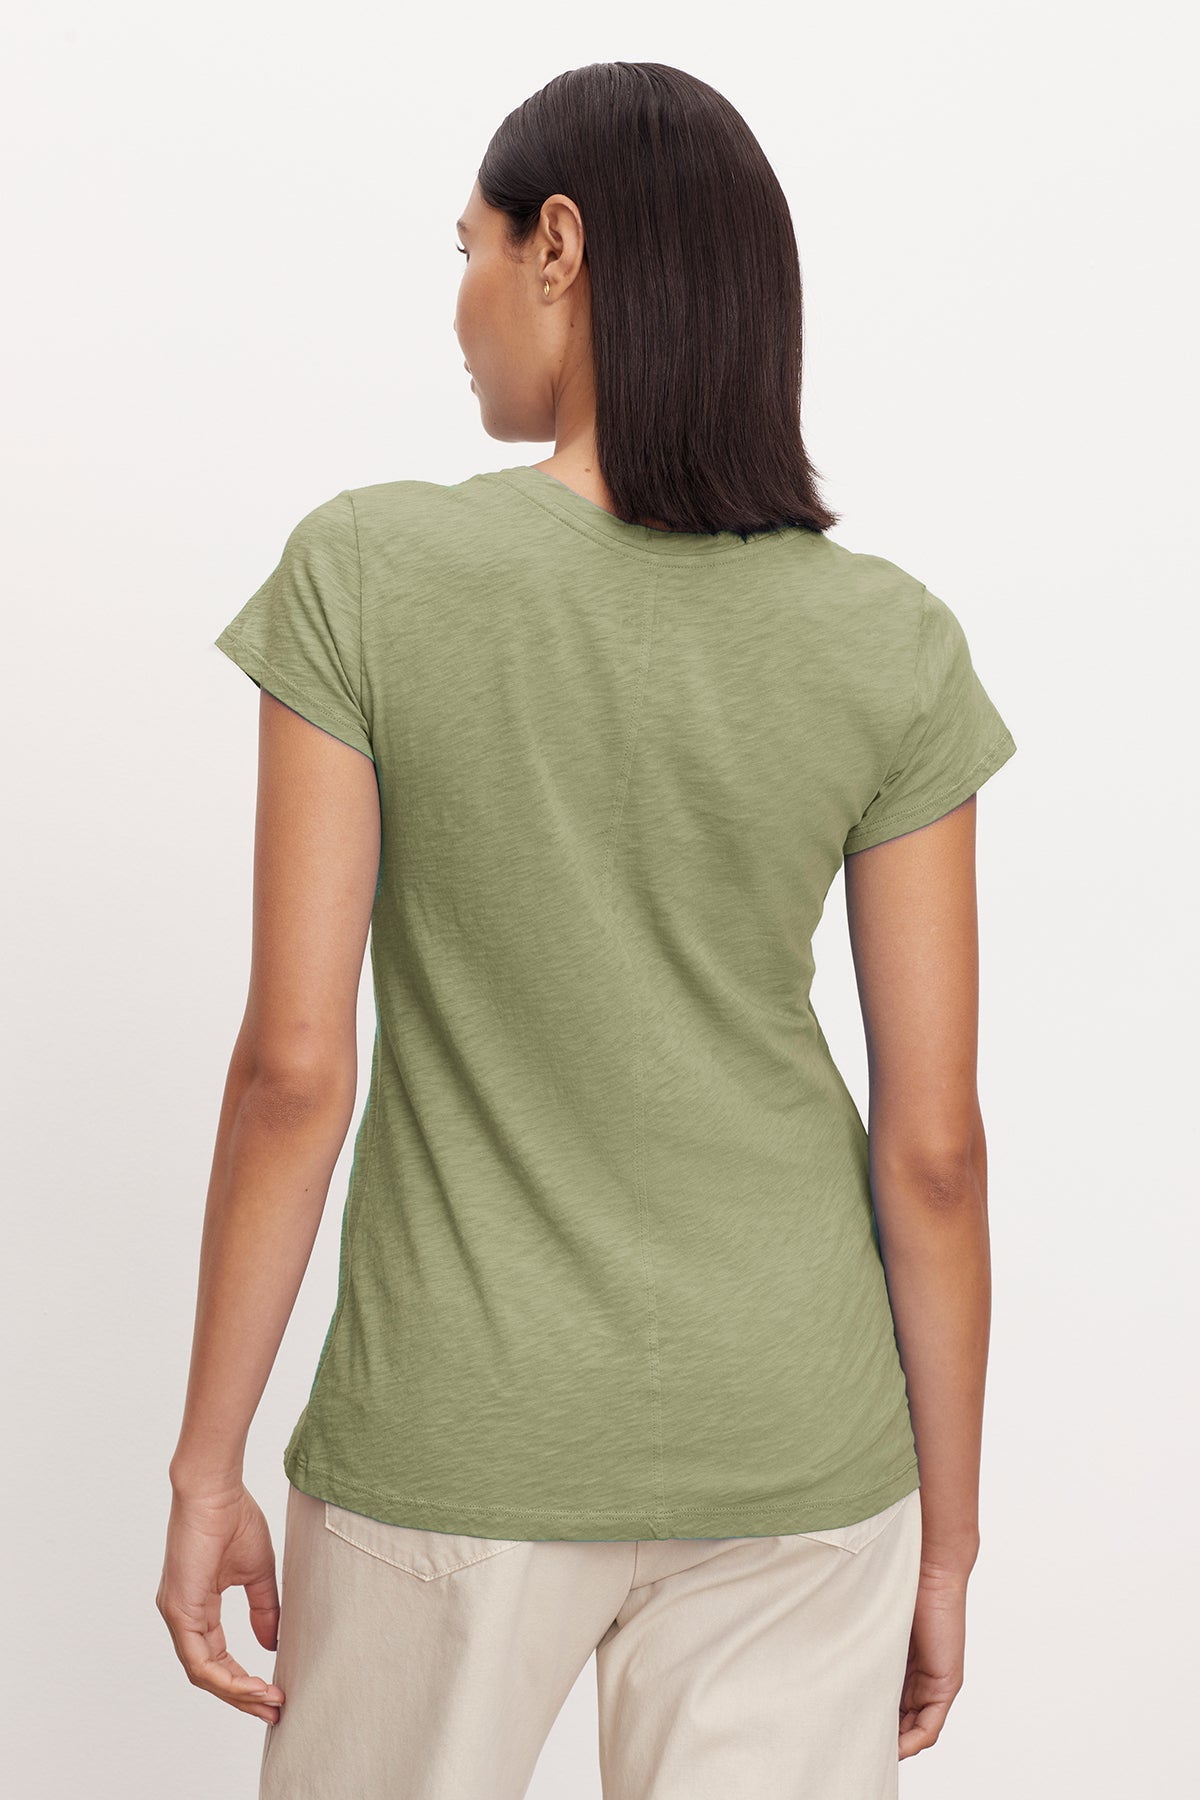 The back view of a woman wearing a Velvet by Graham & Spencer ODELIA COTTON SLUB CREW NECK TEE.-35567693988033